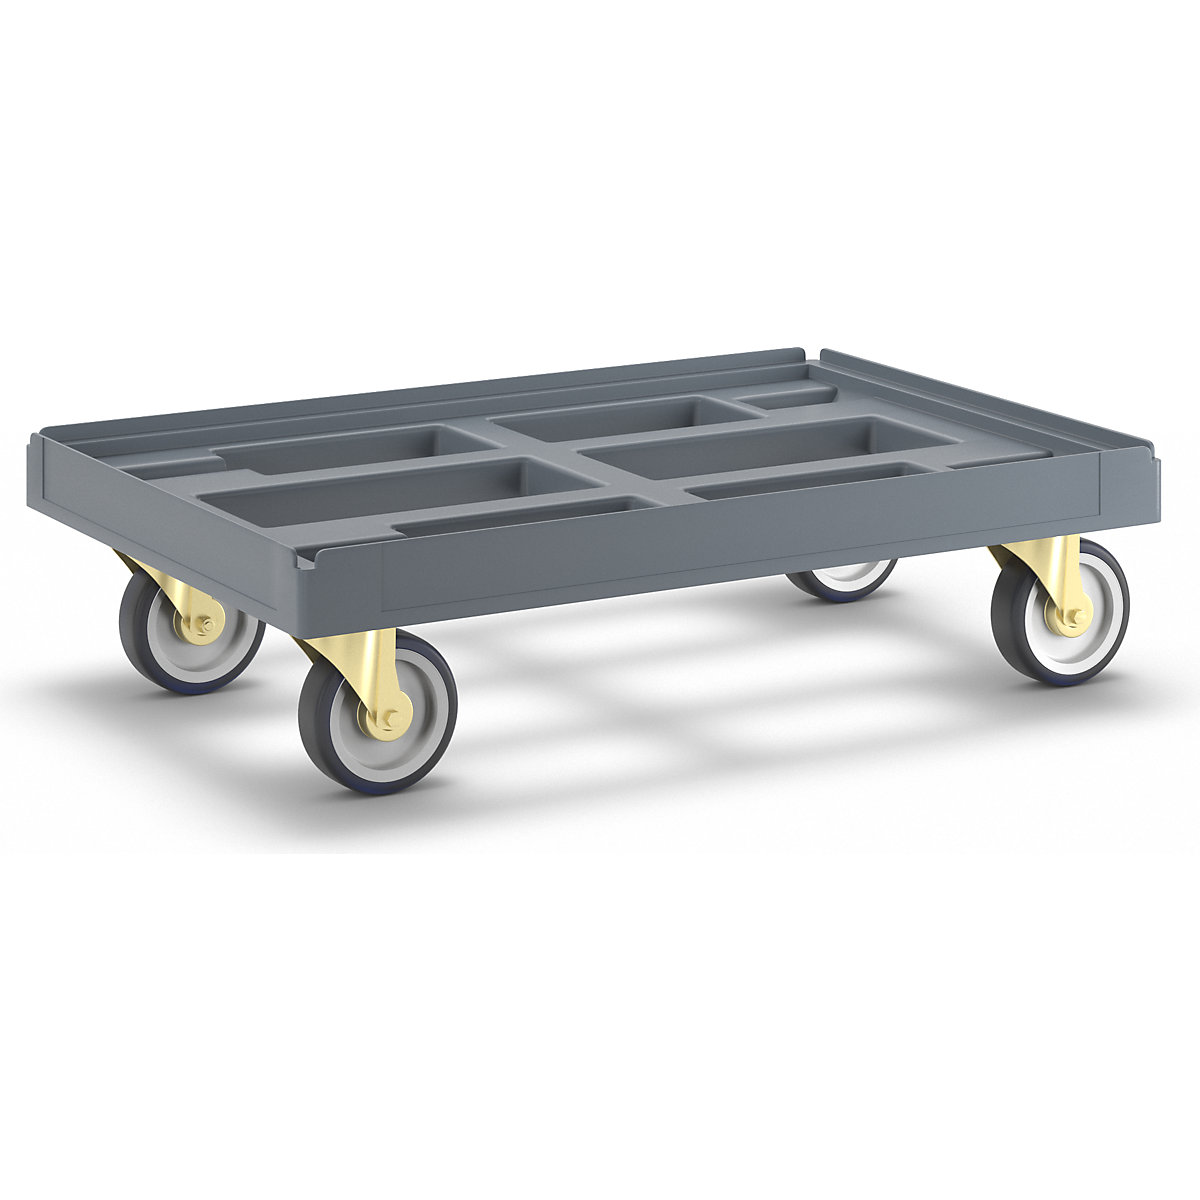 Transport dolly, LxW 610 x 410 mm, made of HDPE, grey-10